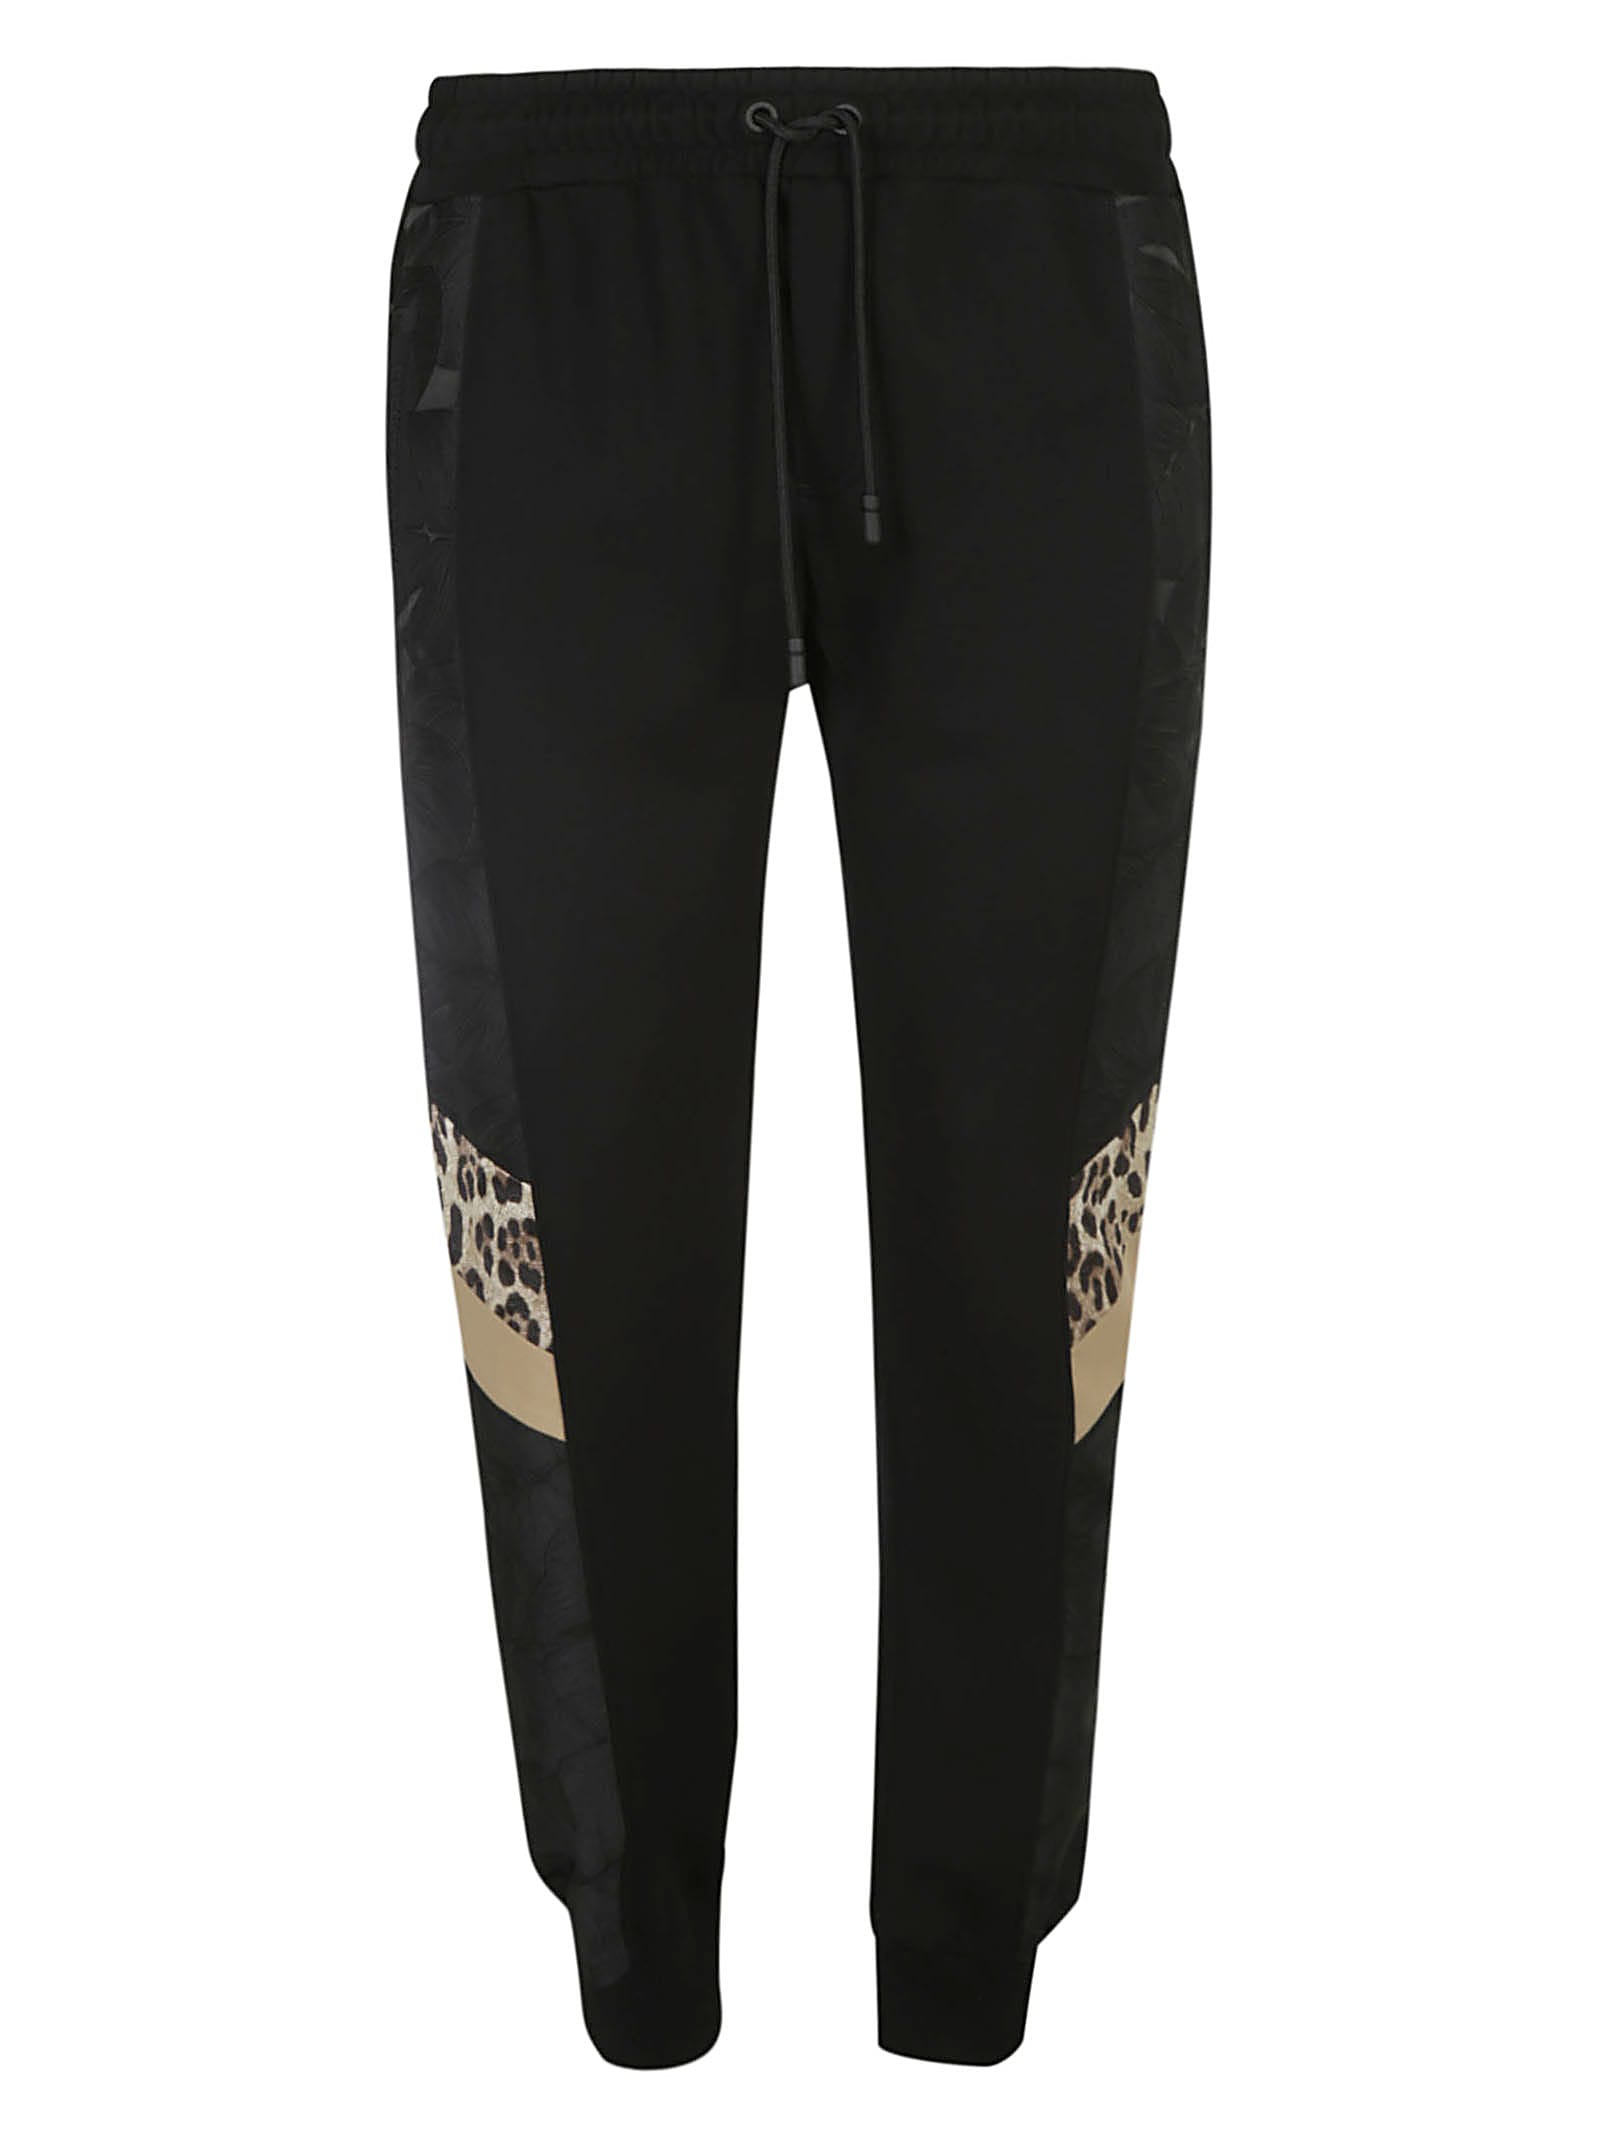 Dolce & Gabbana Floral Sided Track Pants